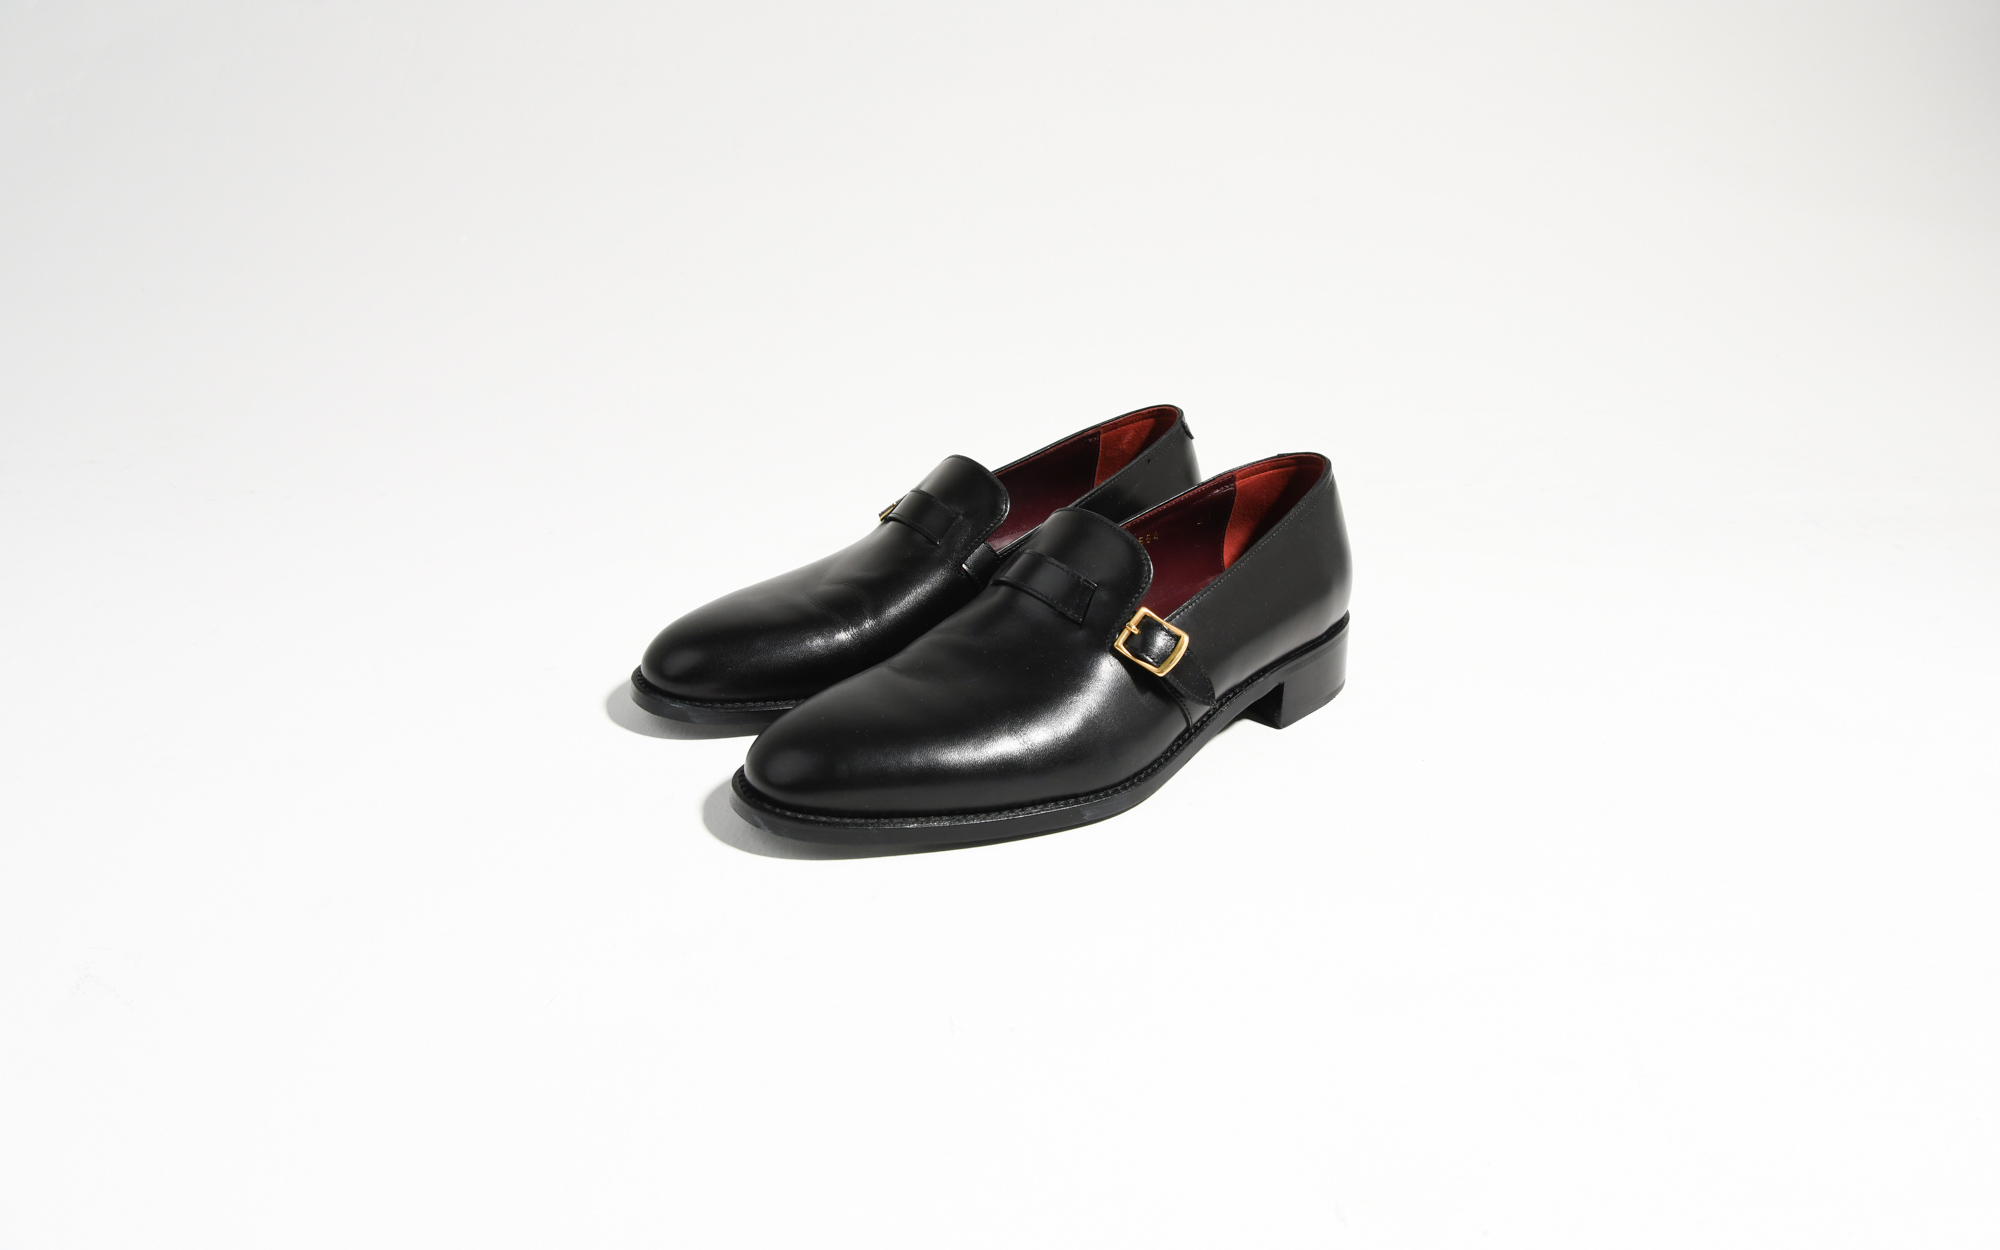 box calf leather buckled loafers - black